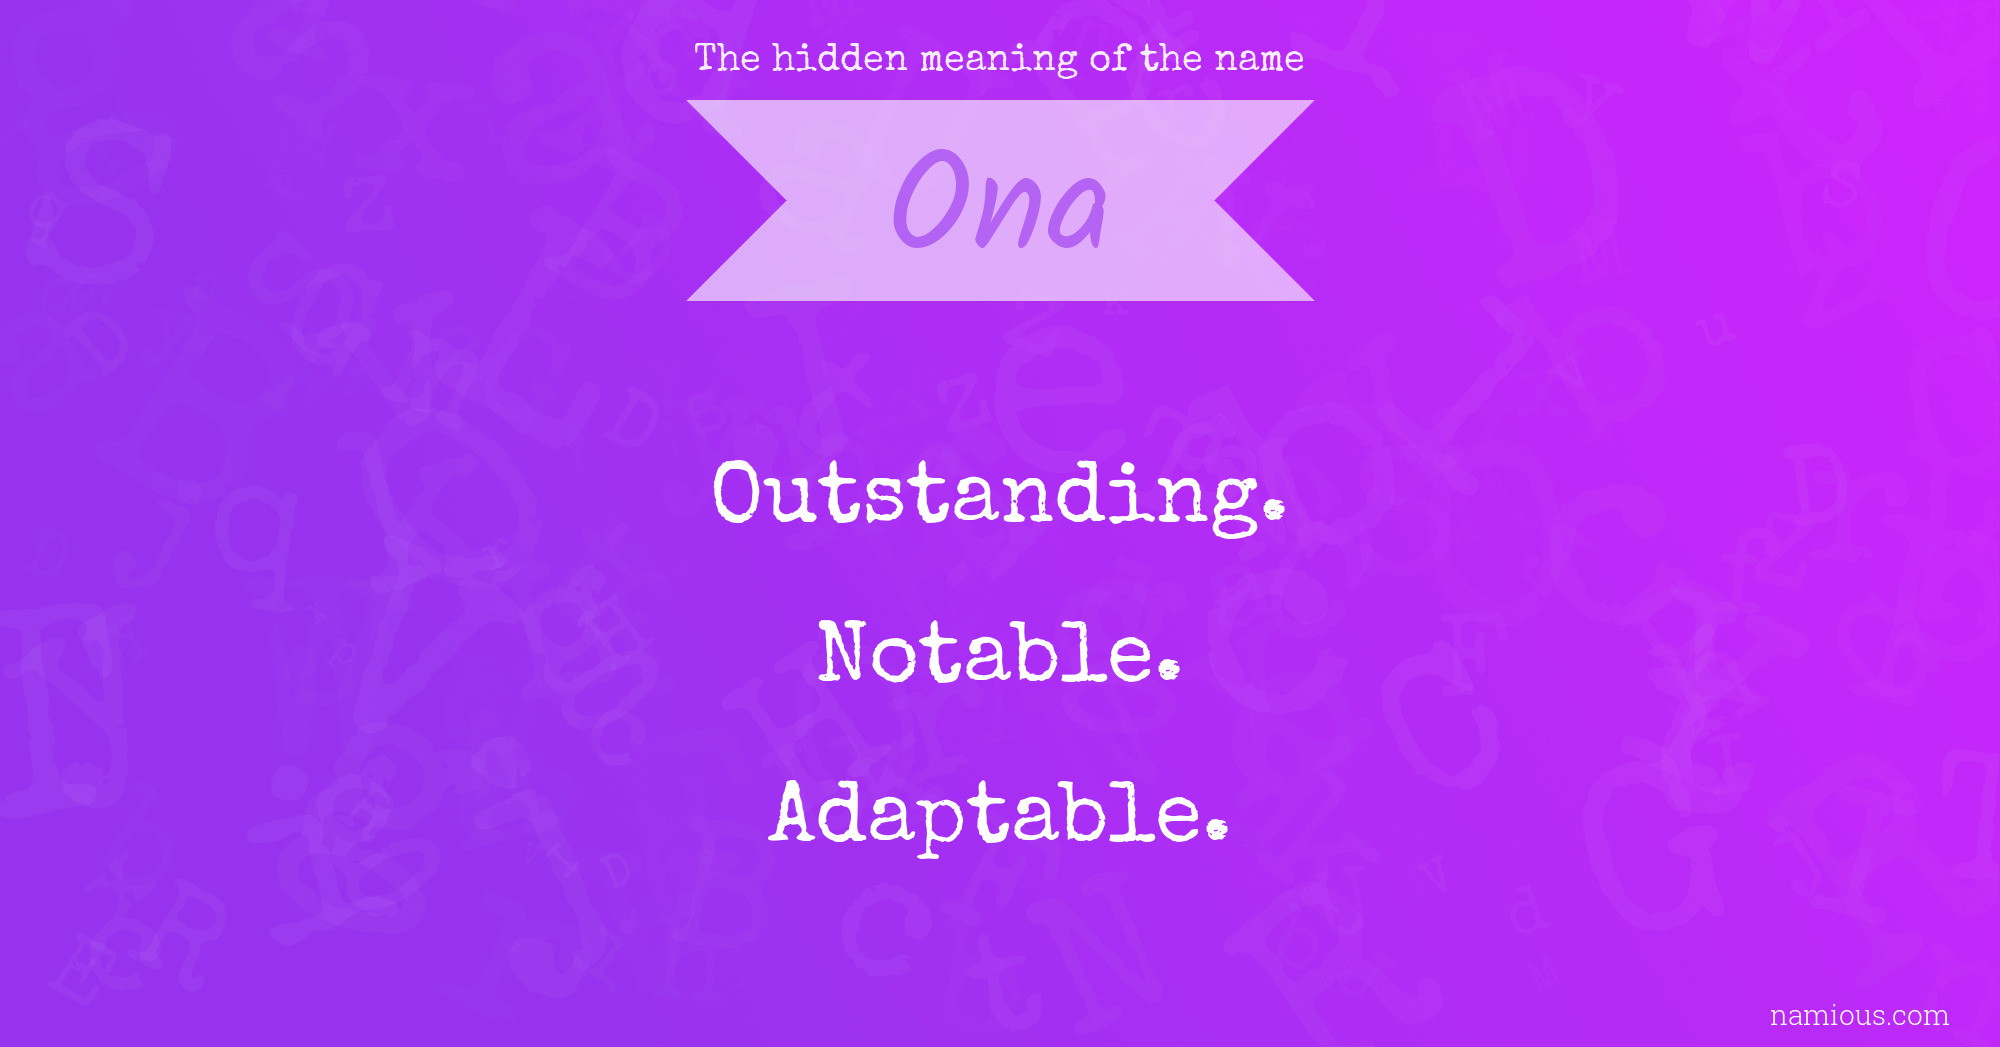 The hidden meaning of the name Ona